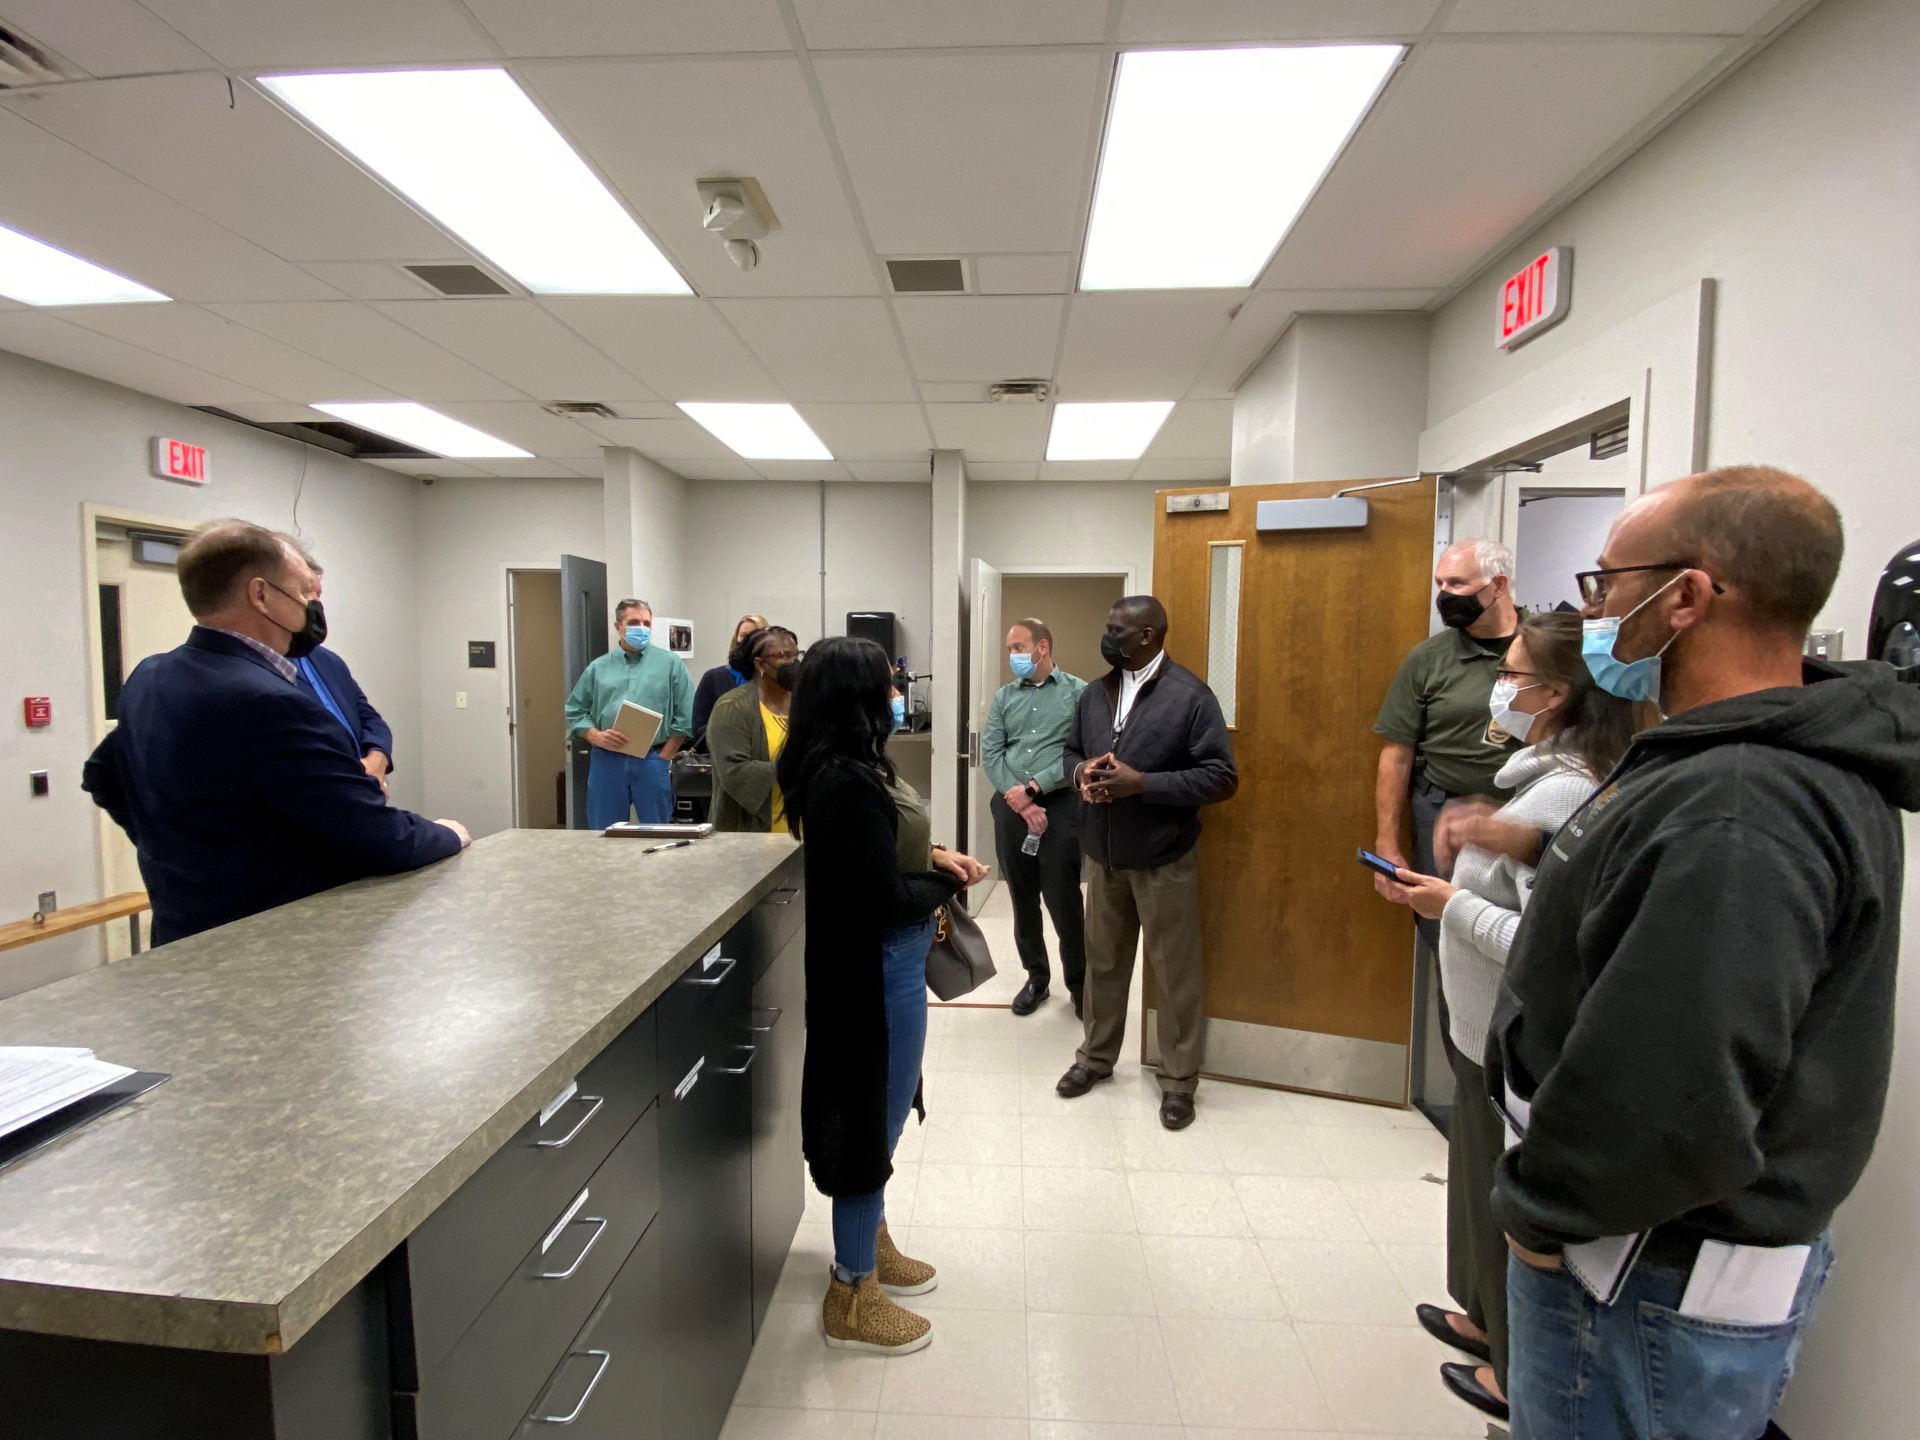 The study group tours the current police station 